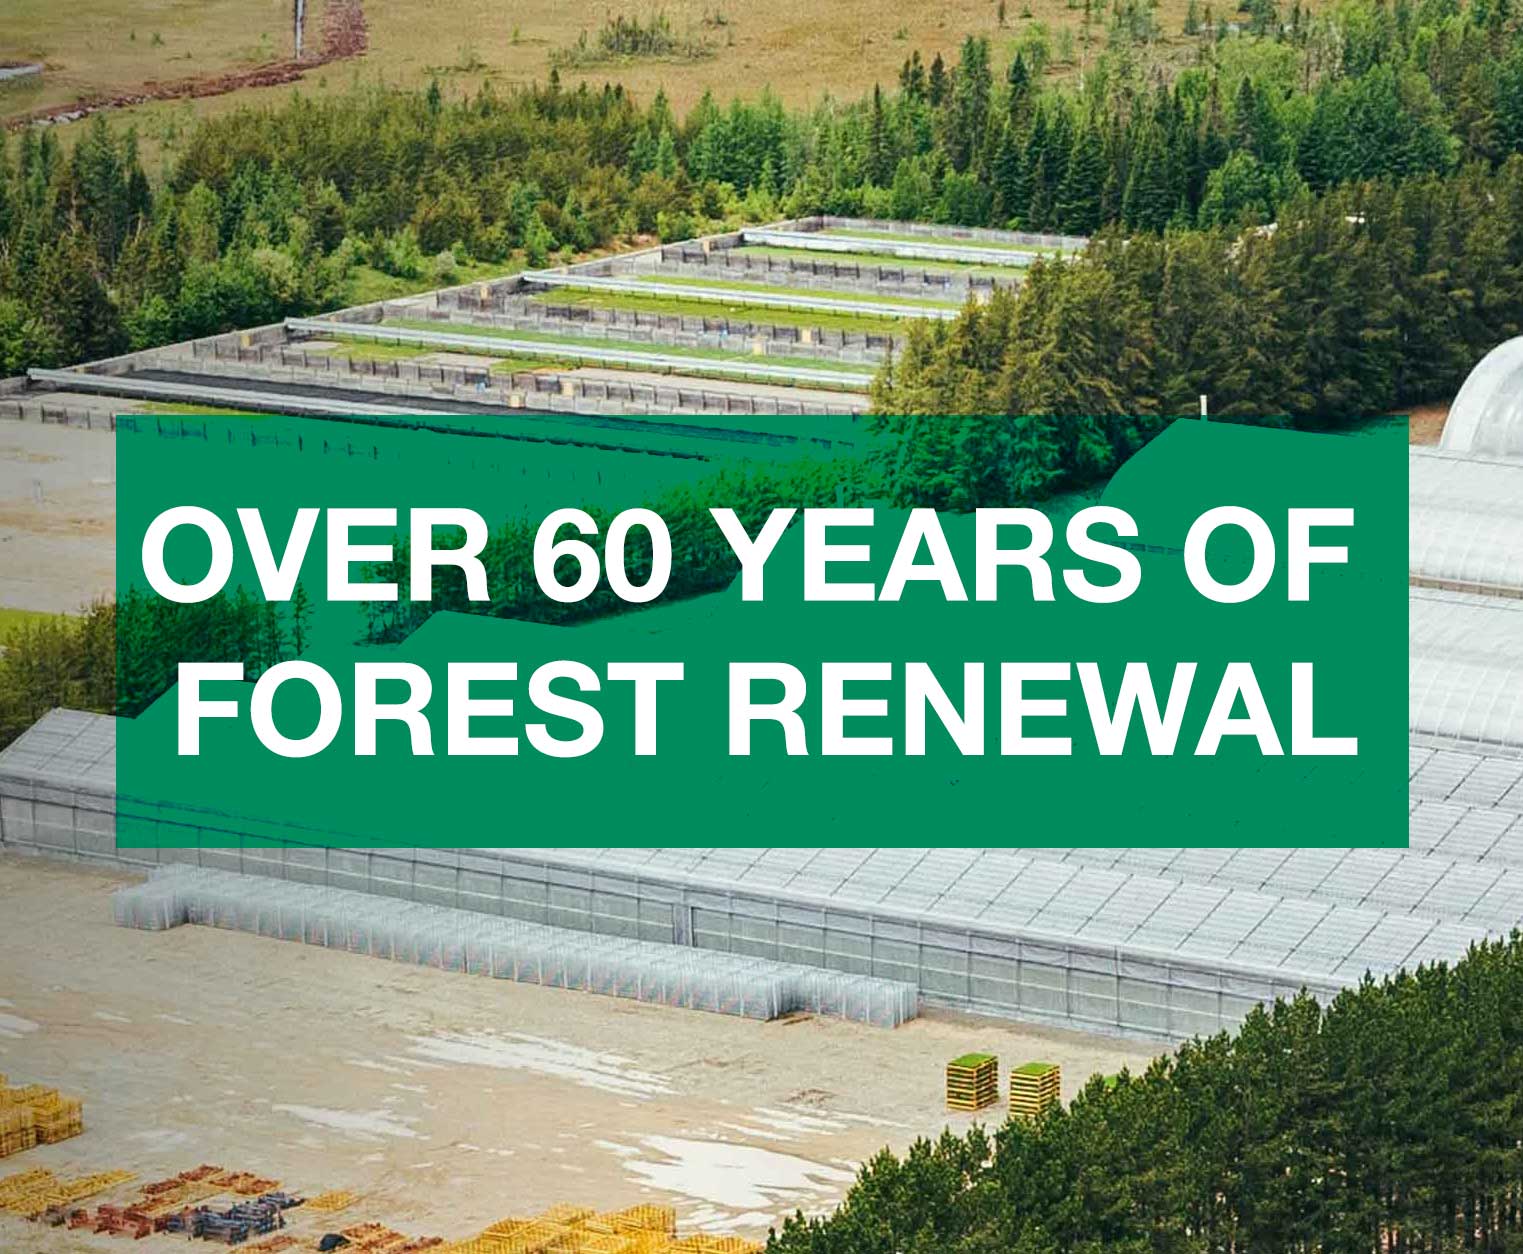 tile-OVER-60-YEARS-OF-FOREST-RENEWAL.jpg